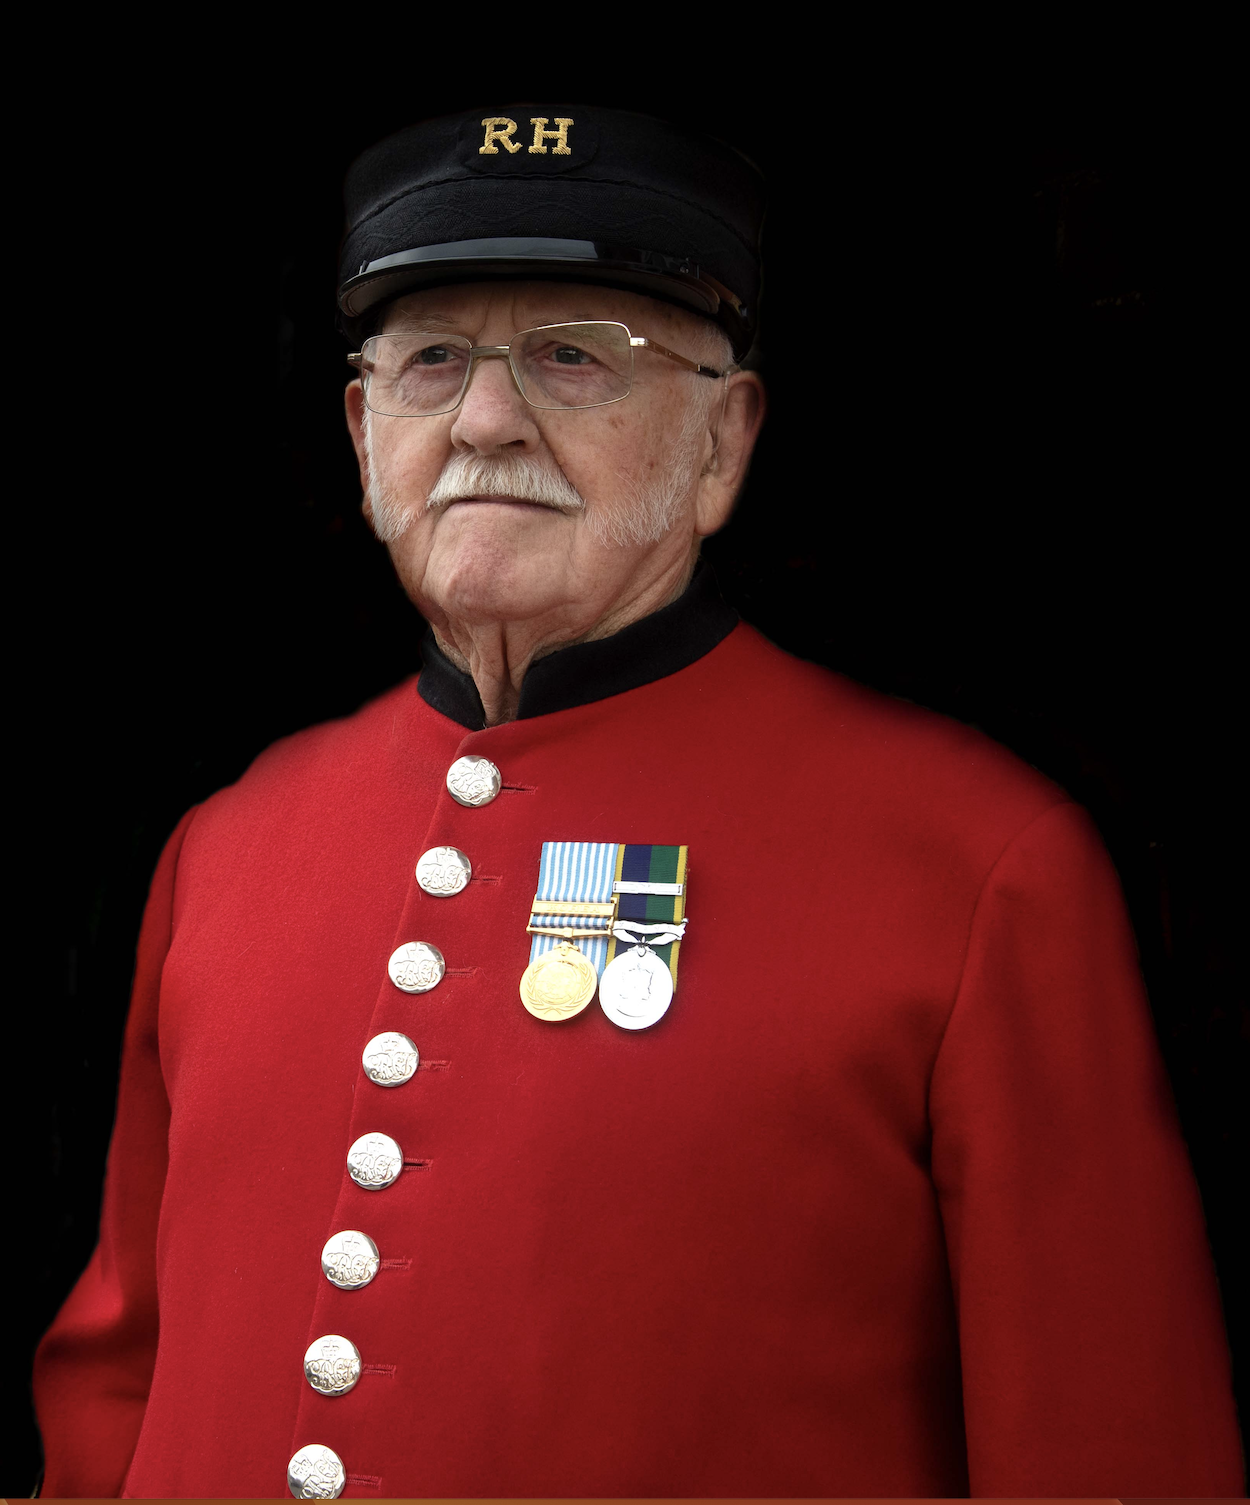 Chelsea Pensioner, George Reed, in his scarlet uniform in front of a black background